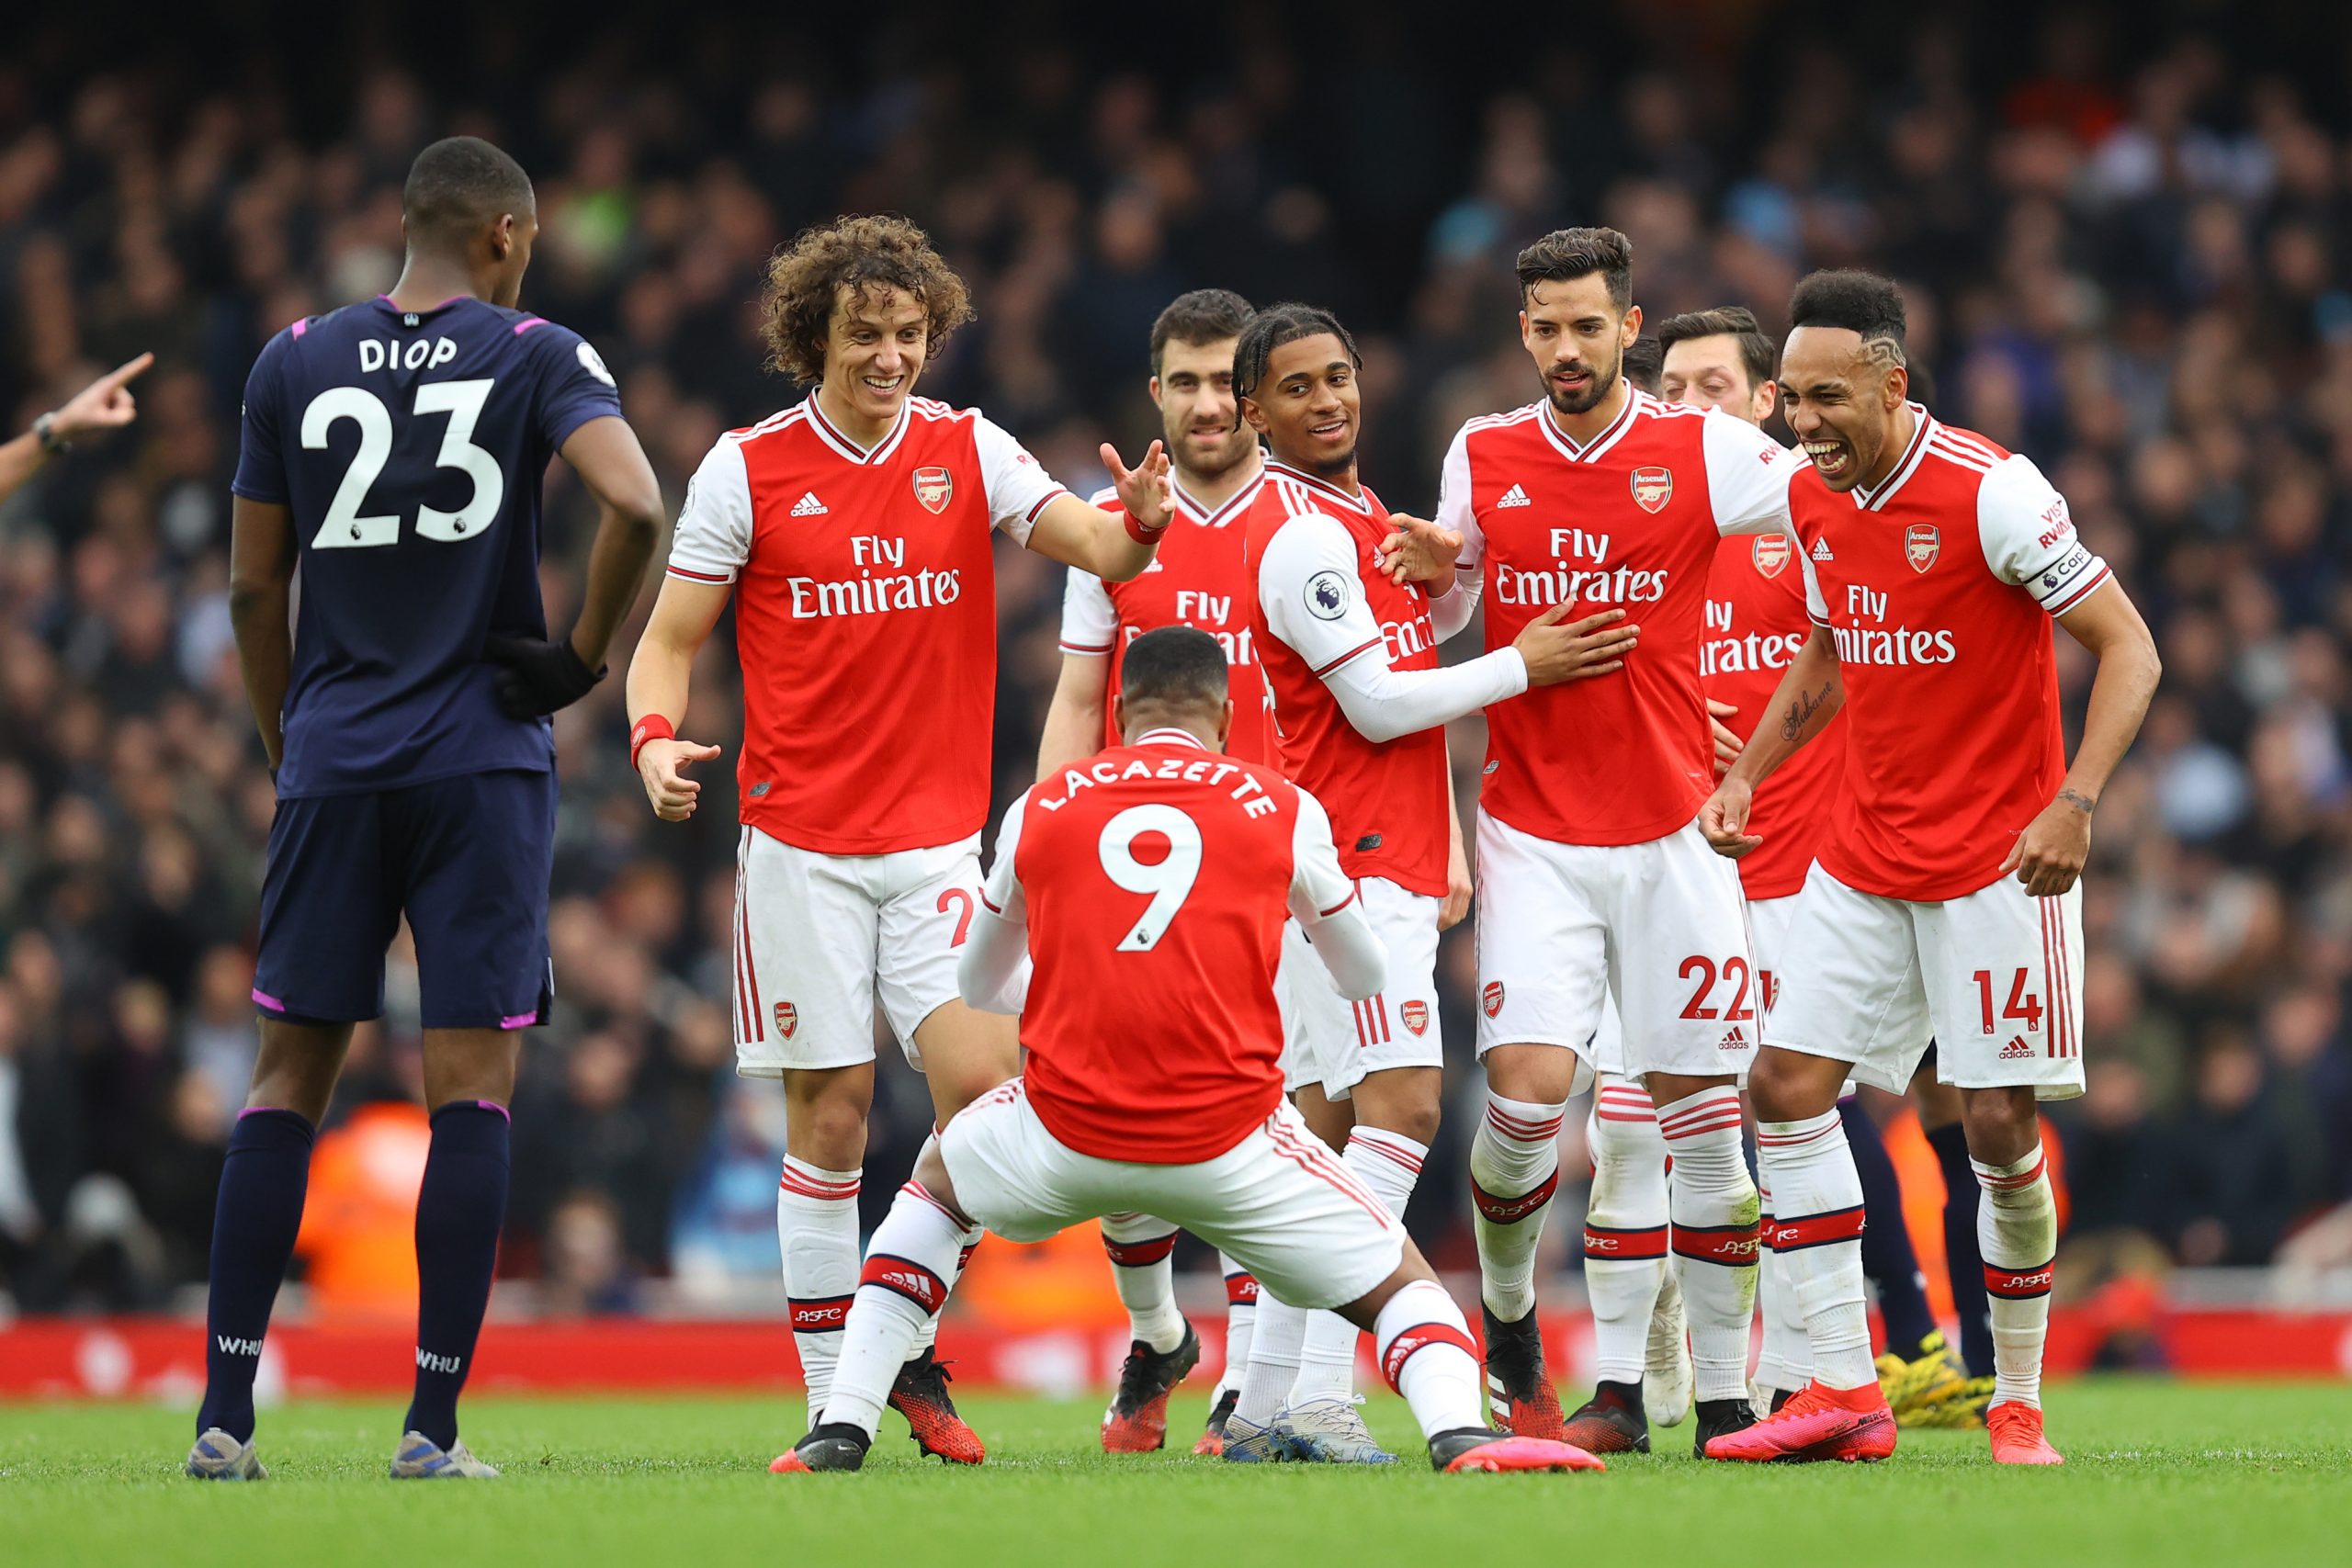 Alexandre Lacazette of Arsenal celebrates with teammates after scoring his team's first goal which was given by VAR during the Premier League match between Arsenal FC and West Ham United at Emirates Stadium on March 07, 2020 in London, United Kingdom.